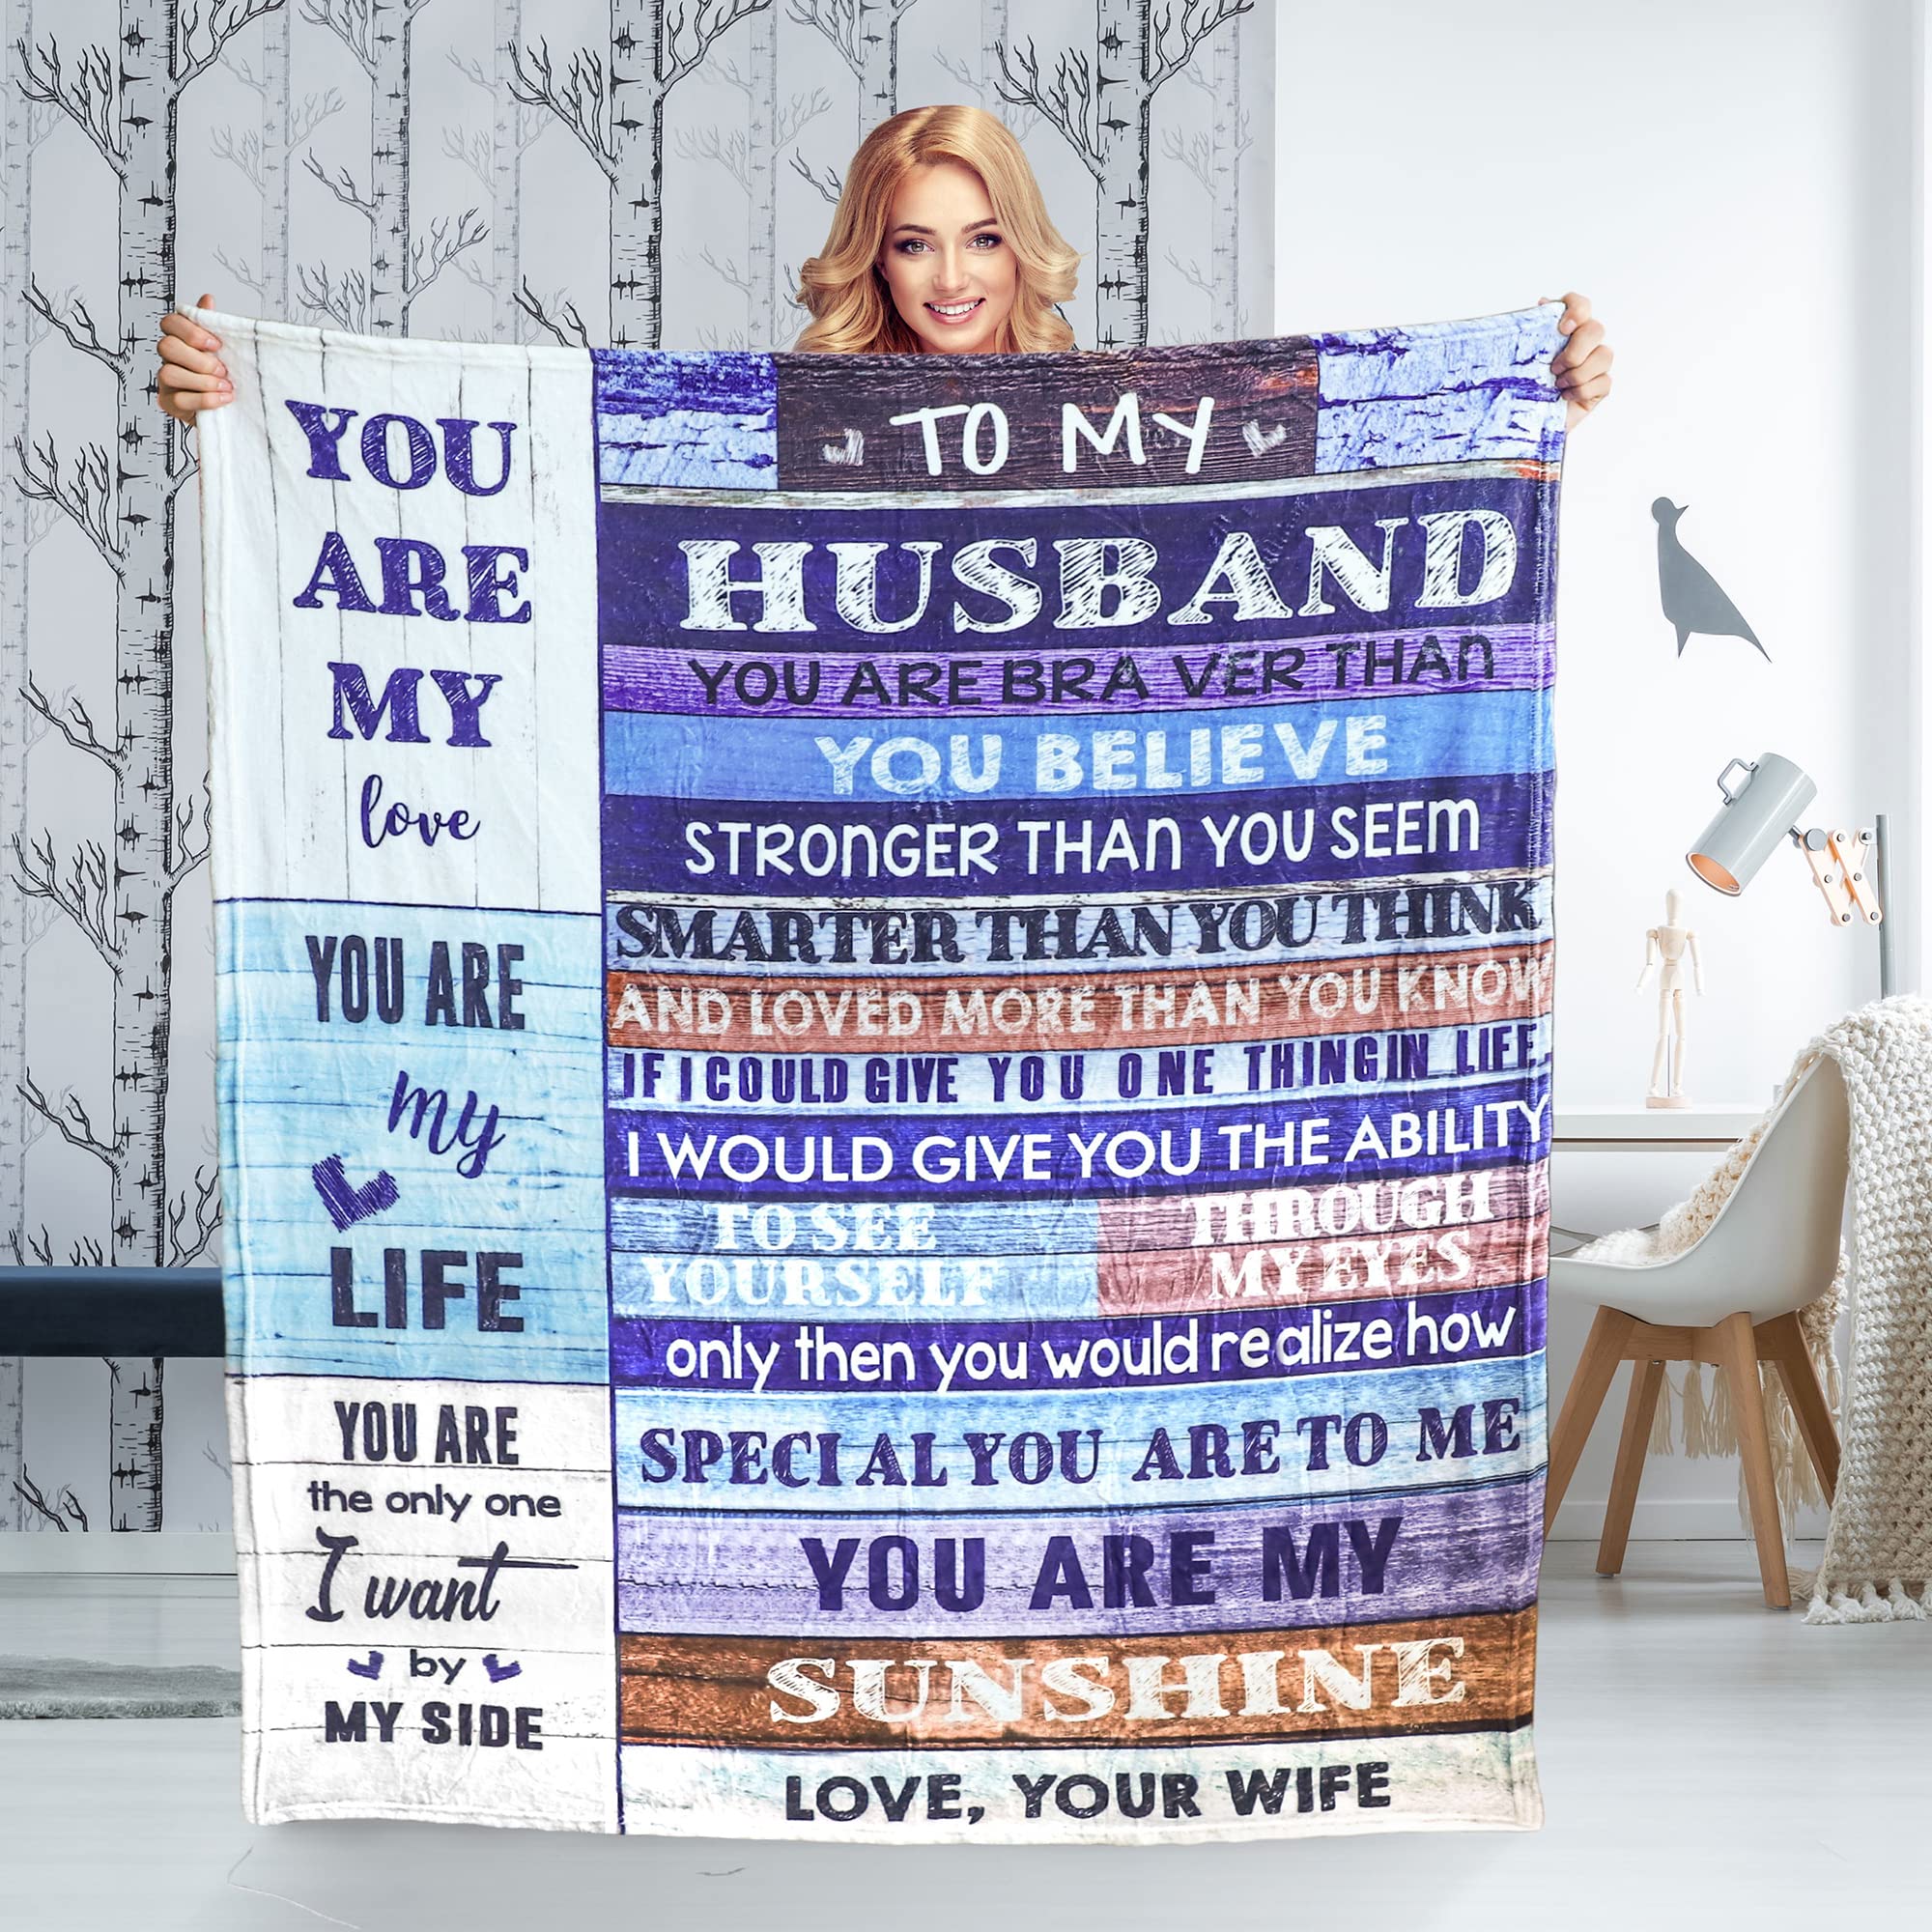 Fuzzy Blanket Gifts for Husband, Soft Throw Blanket Personalized Birthday for Husband from Wife Cute Big Plush Blanket to My Husband Valentines Day...